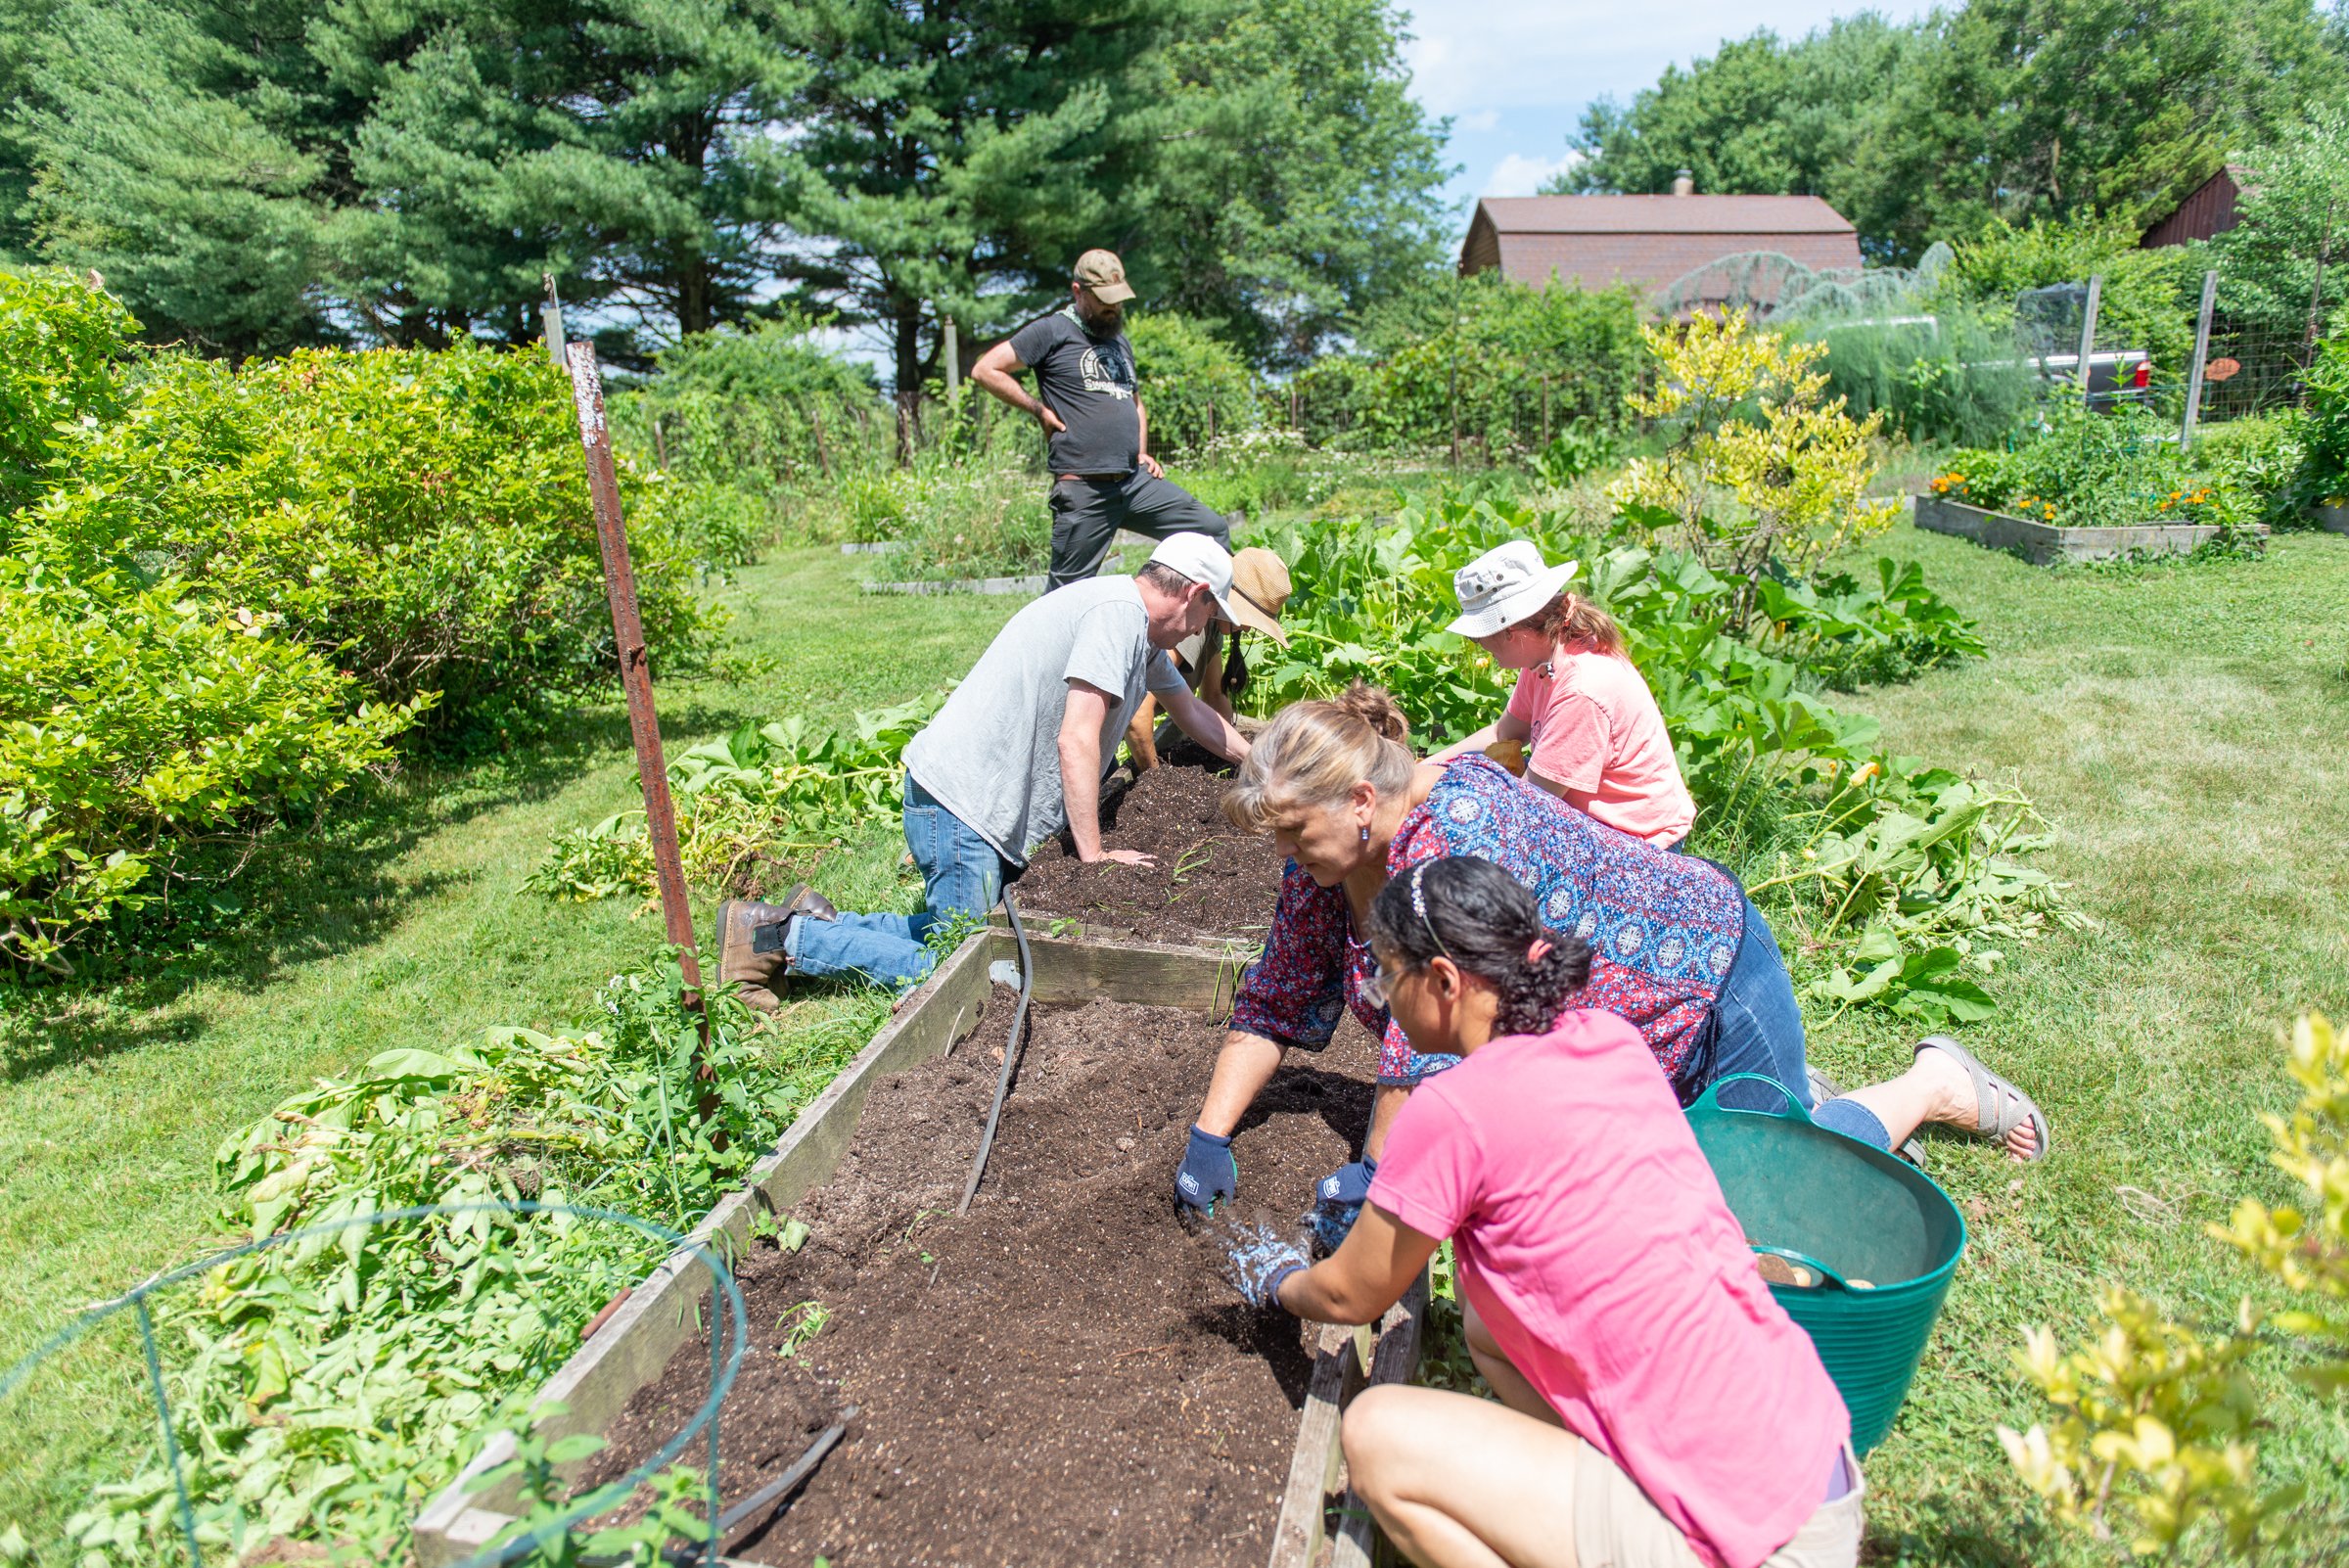 Members of Sotlane Horticulture working together in Soltane's Herb Garden